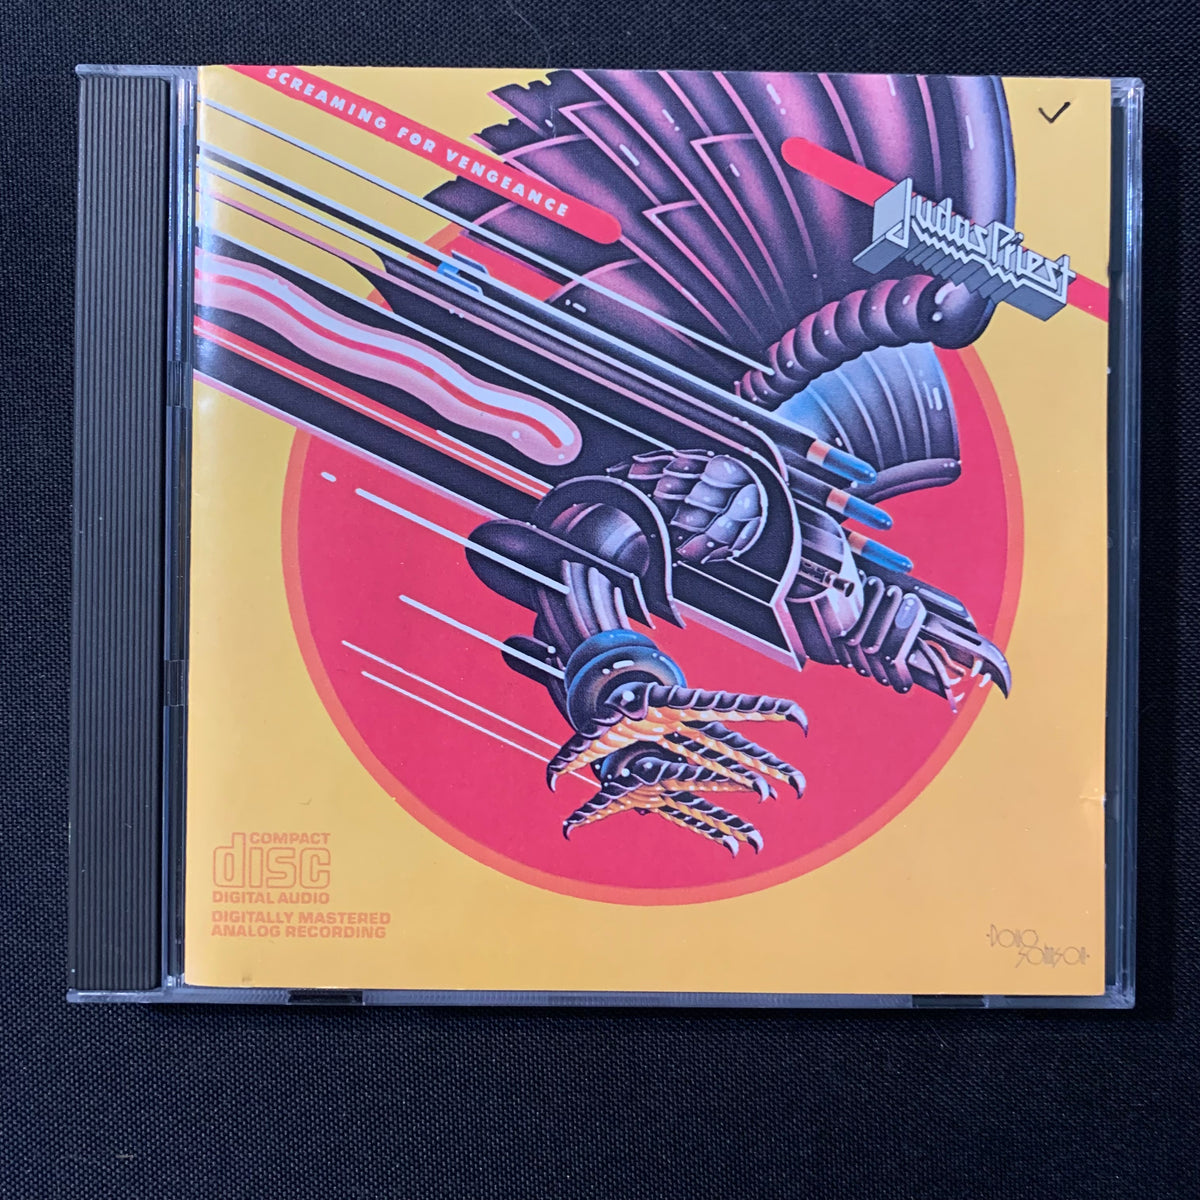 CD Judas Priest 'Screaming For Vengeance' (1982) You've Got Another Th –  The Exile Media and Trading Co.